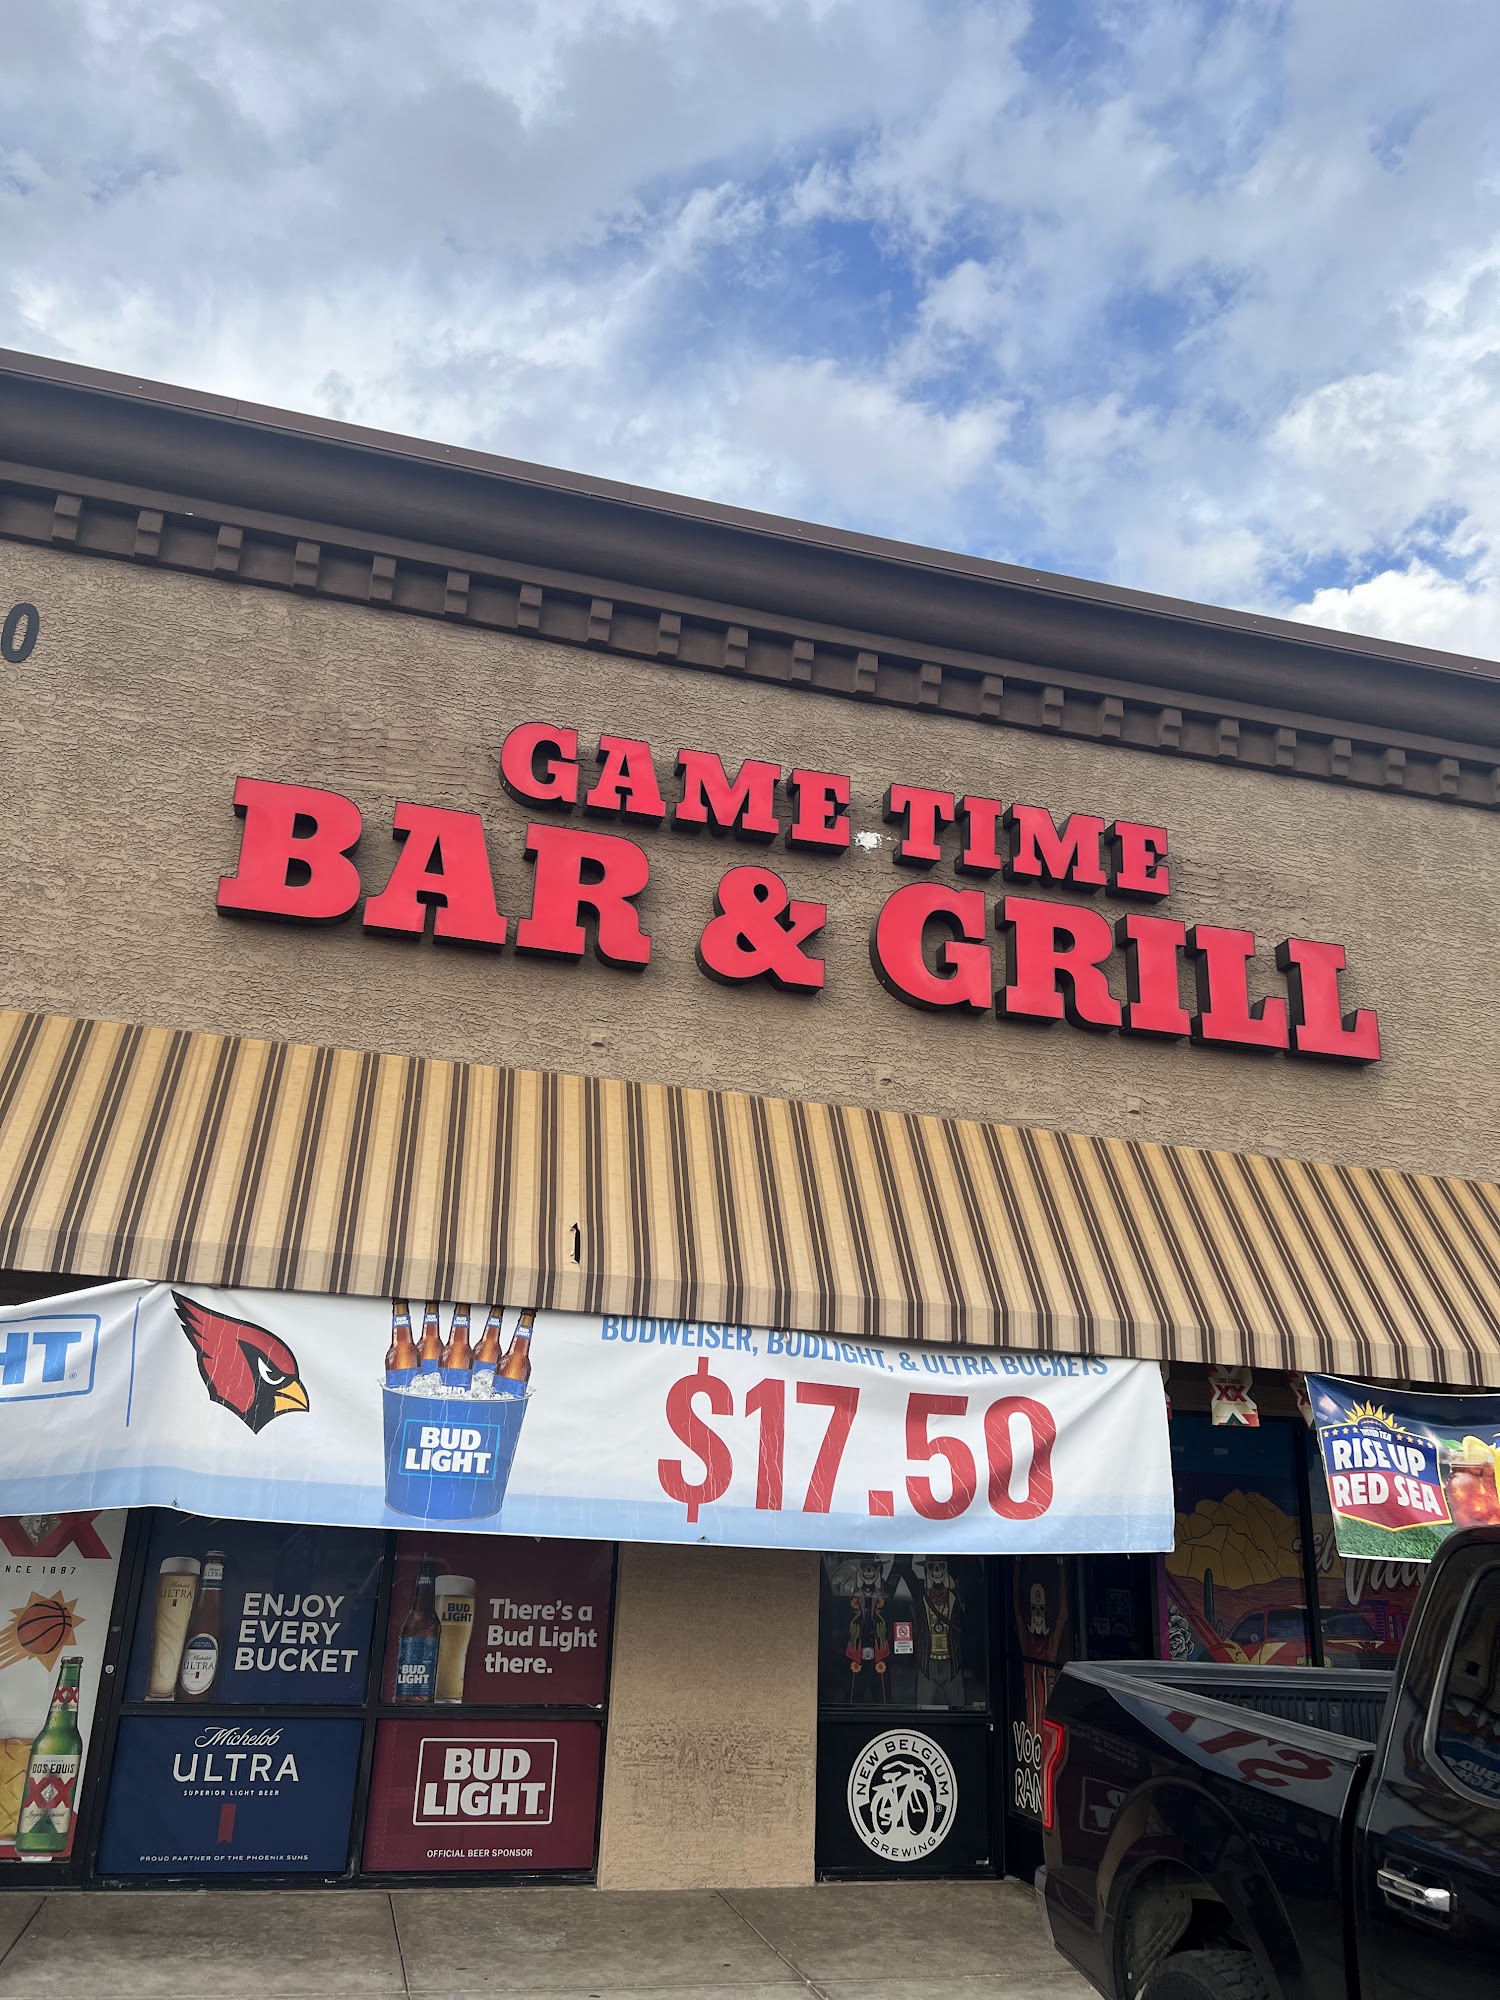 GameTime Bar and Grill